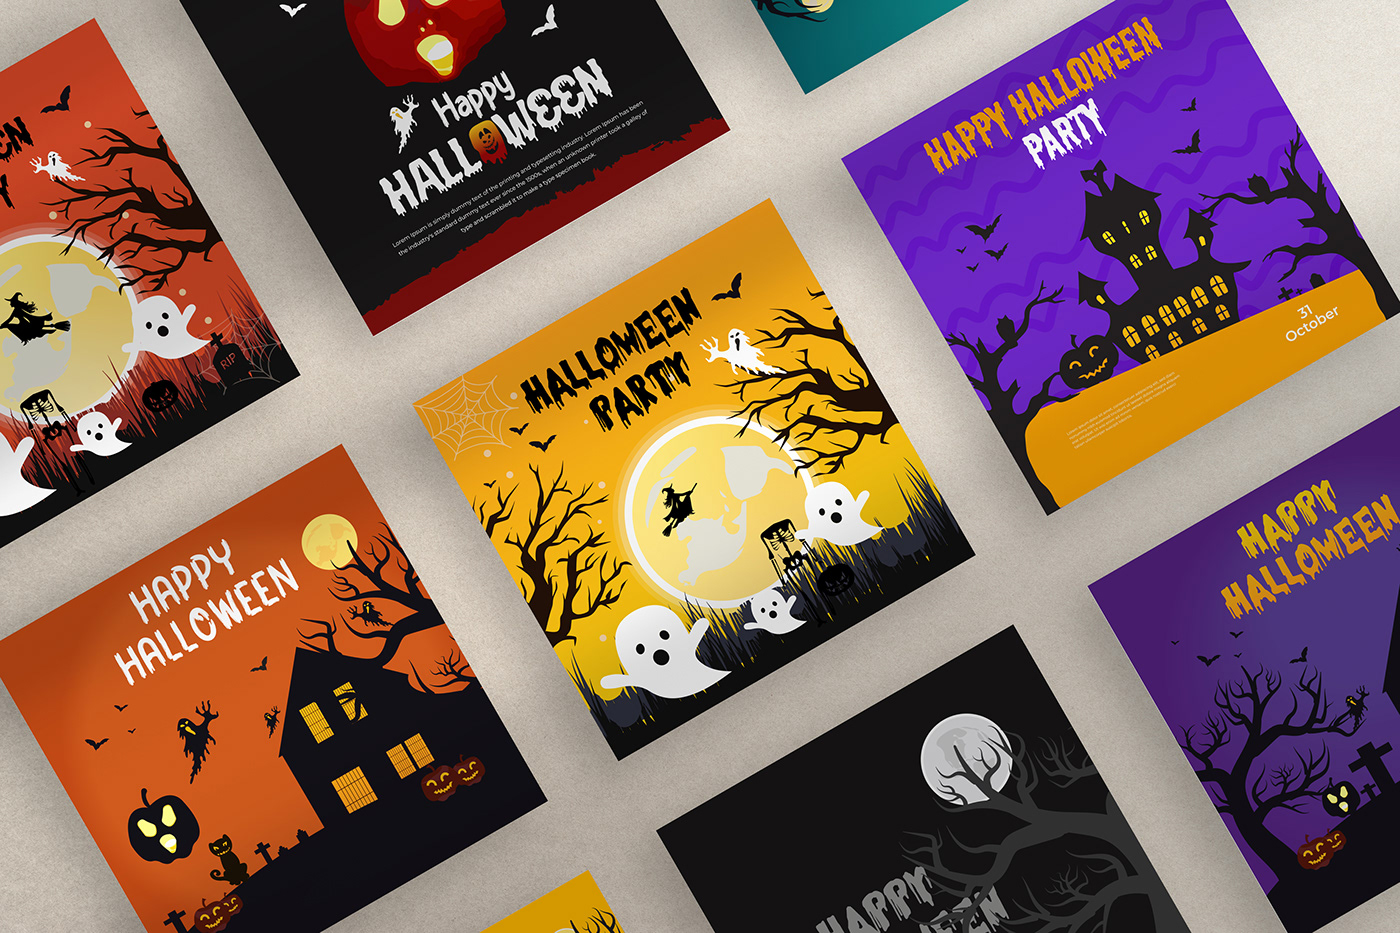 "Double, double, toil, and trouble! Our Halloween social media poster design brews the perfect blend